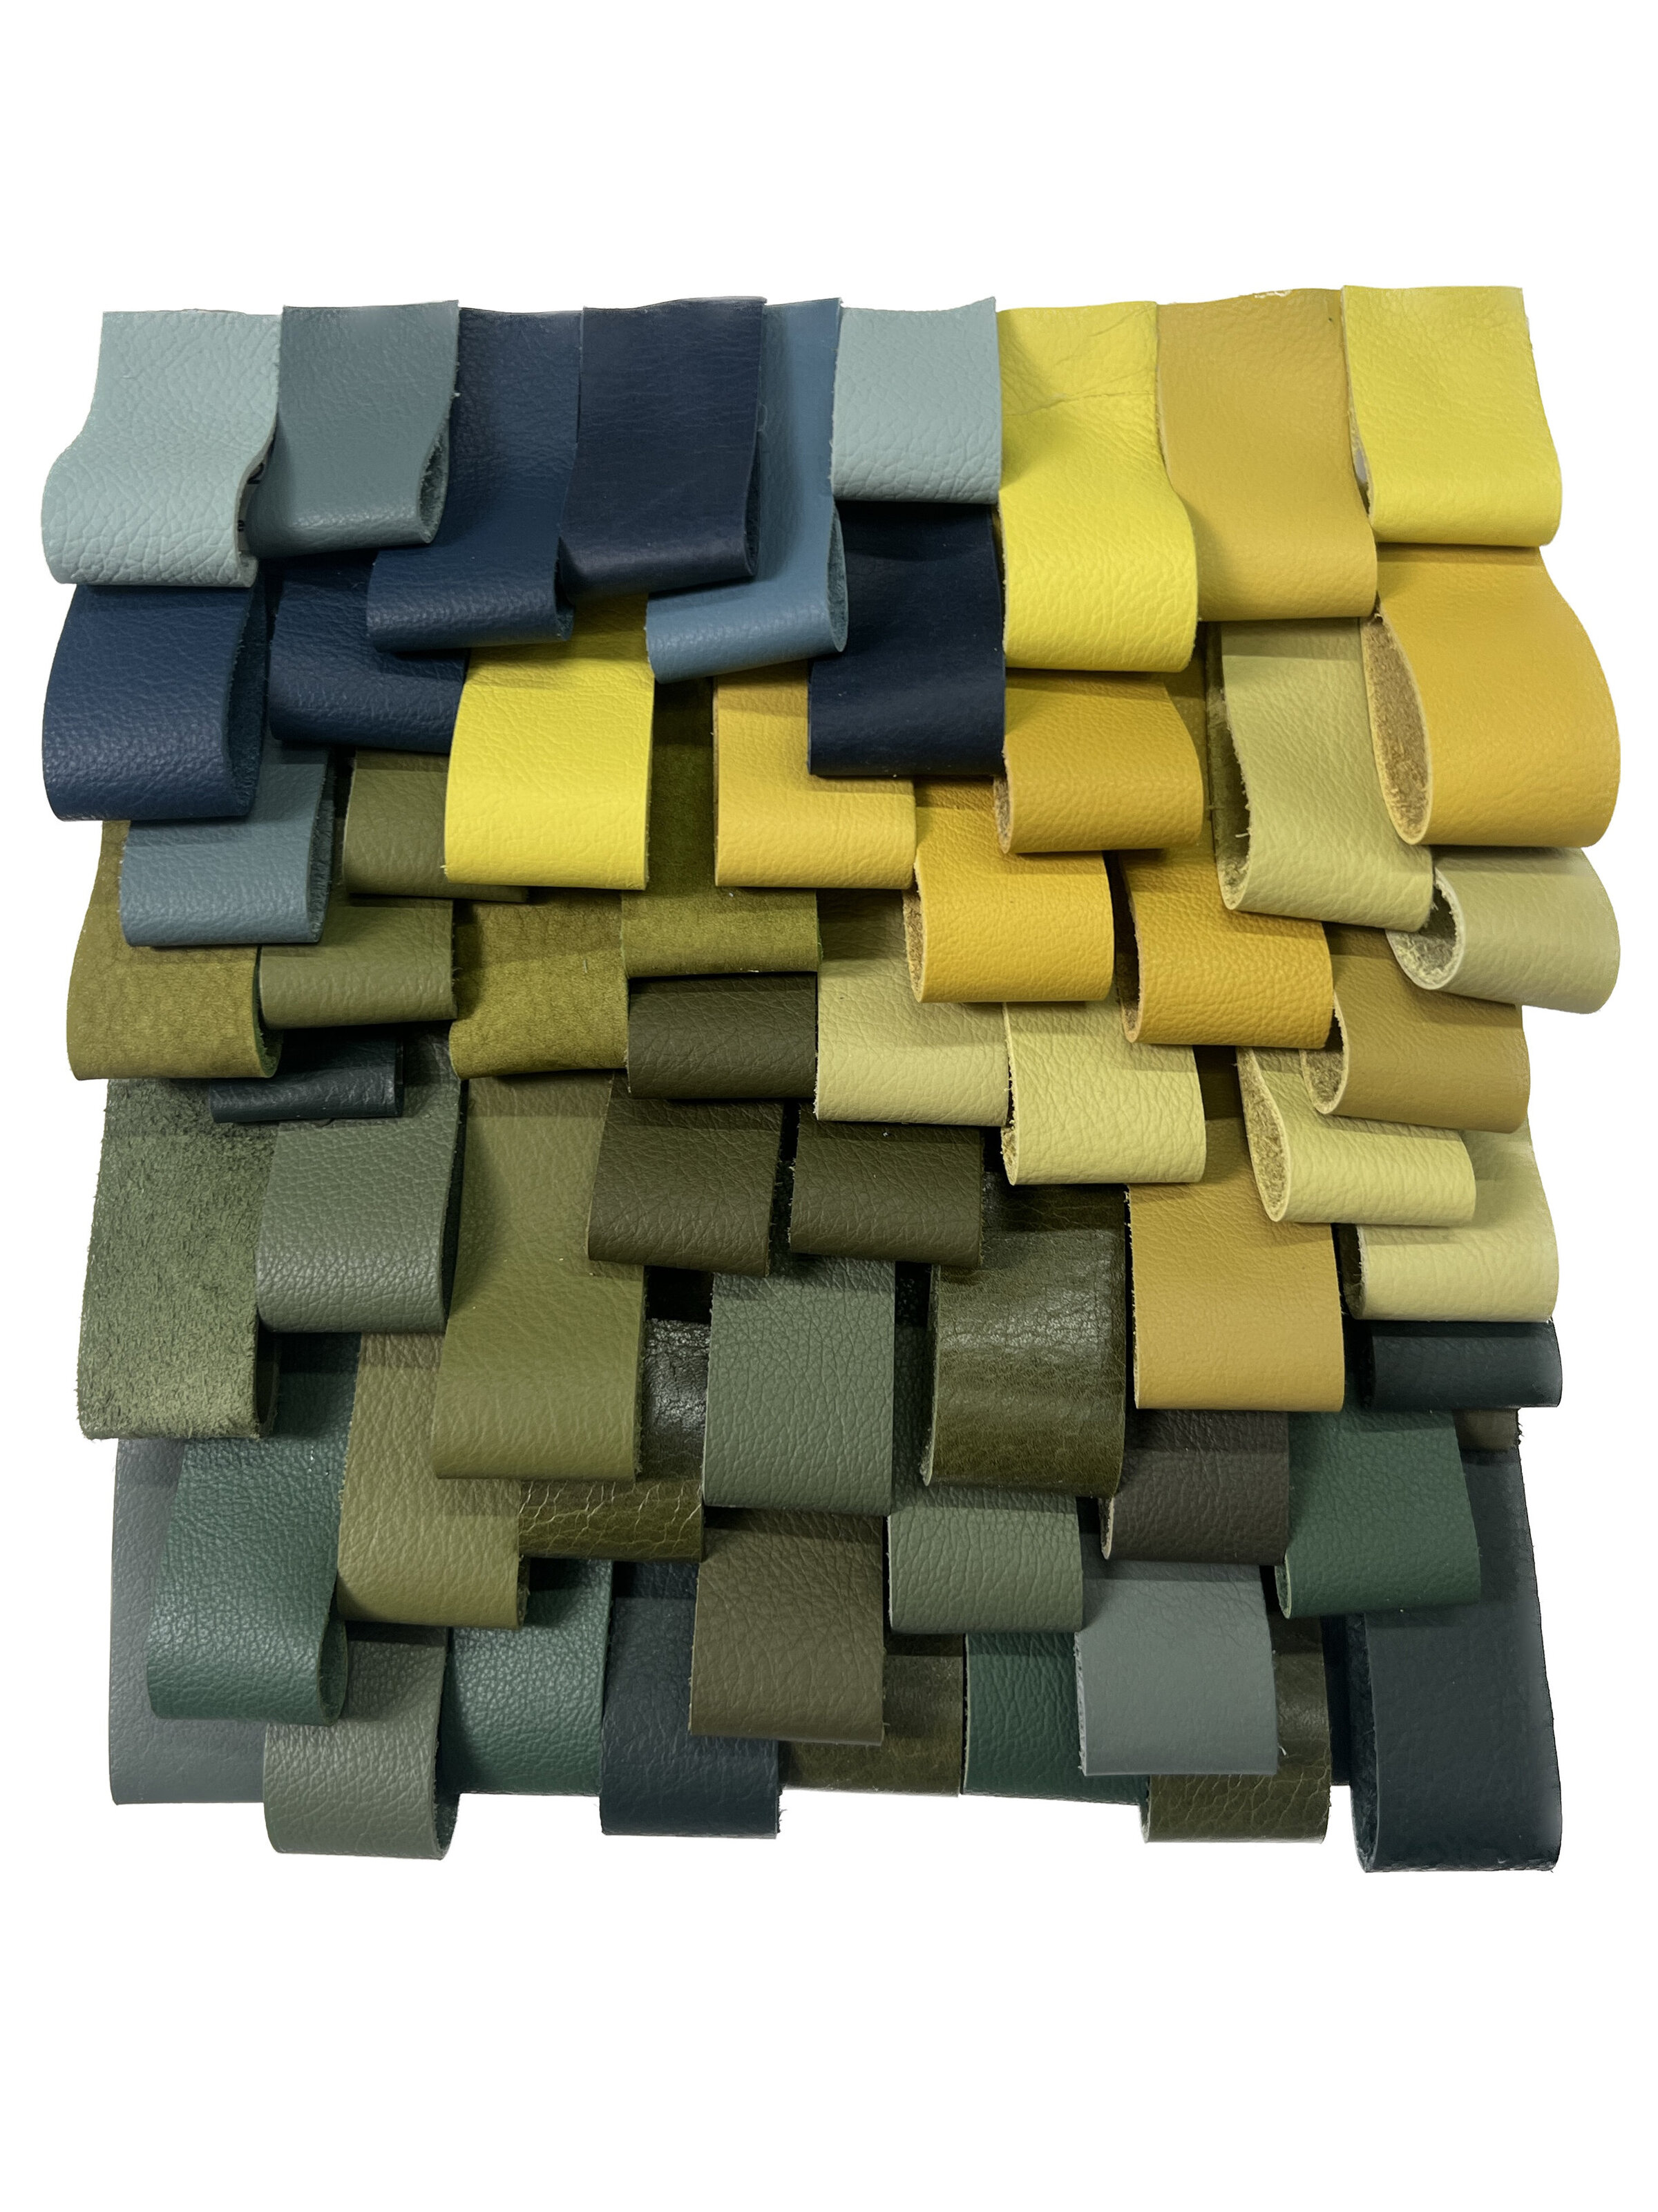 Emily-Mann,-Ink-and-Indigo,-Customizable-layered-leather-dimensional-wall-sculpture